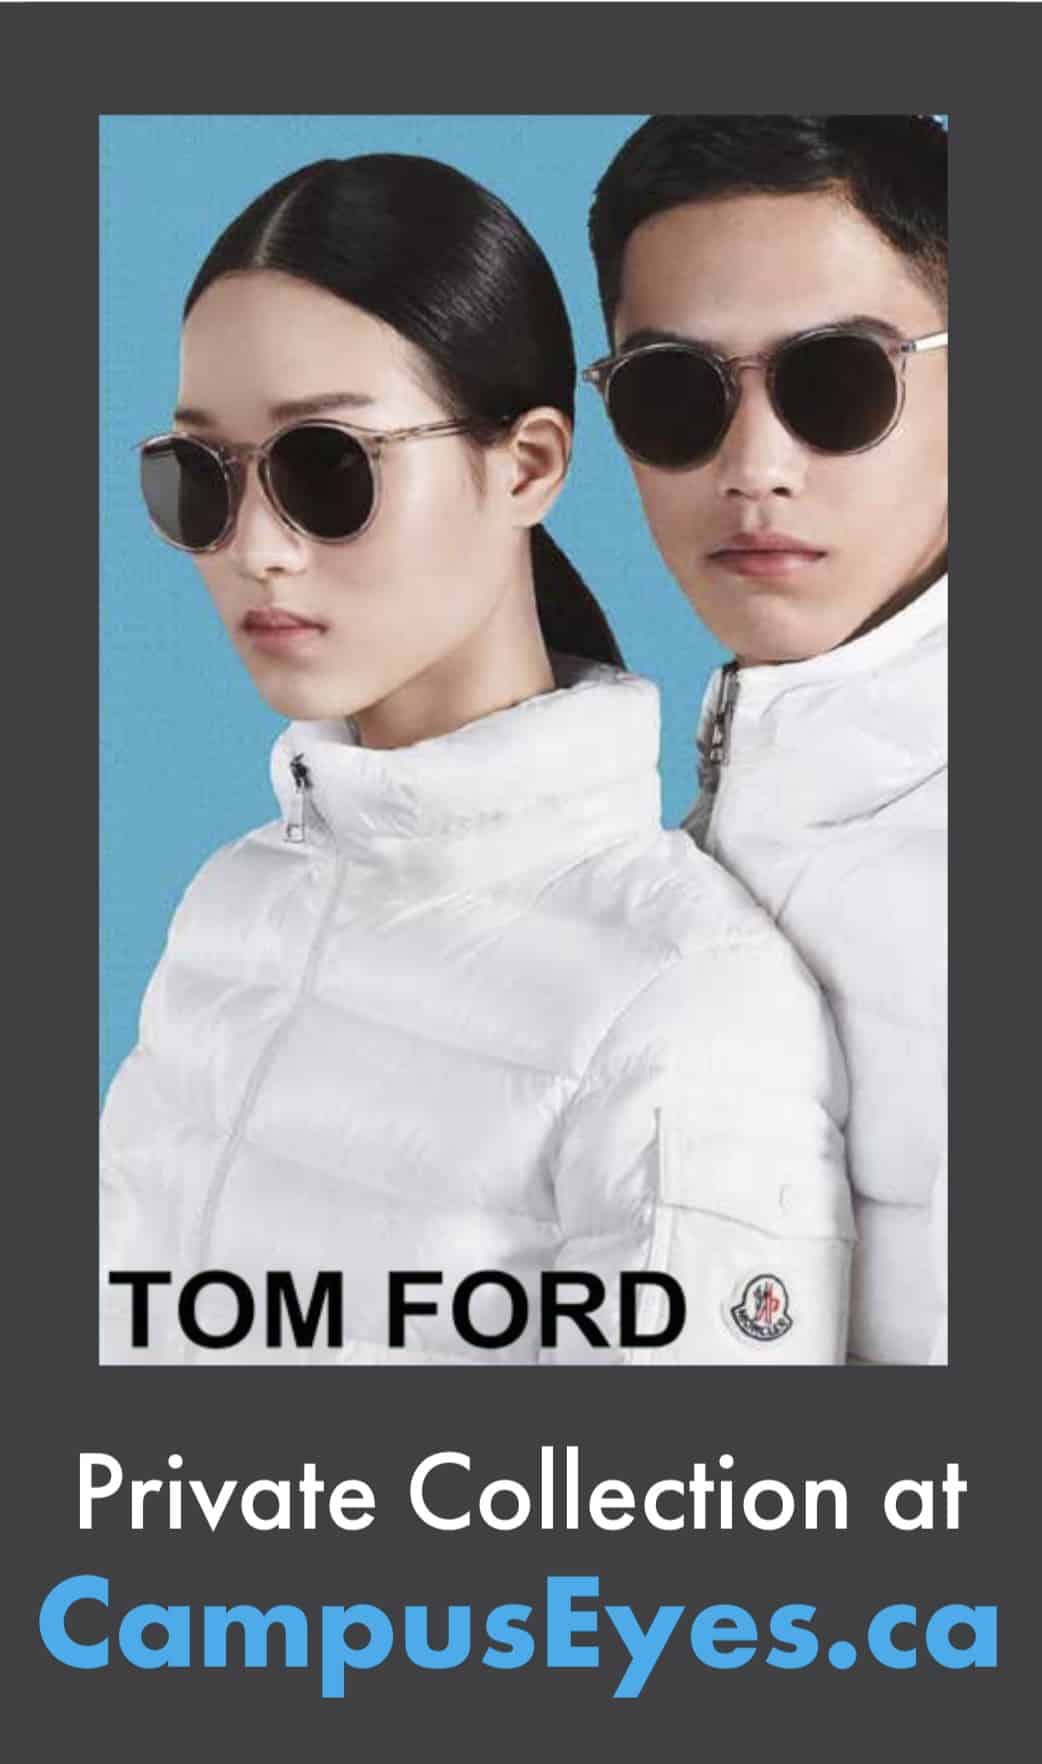 Tom Ford Private Collection - Campus Eyes